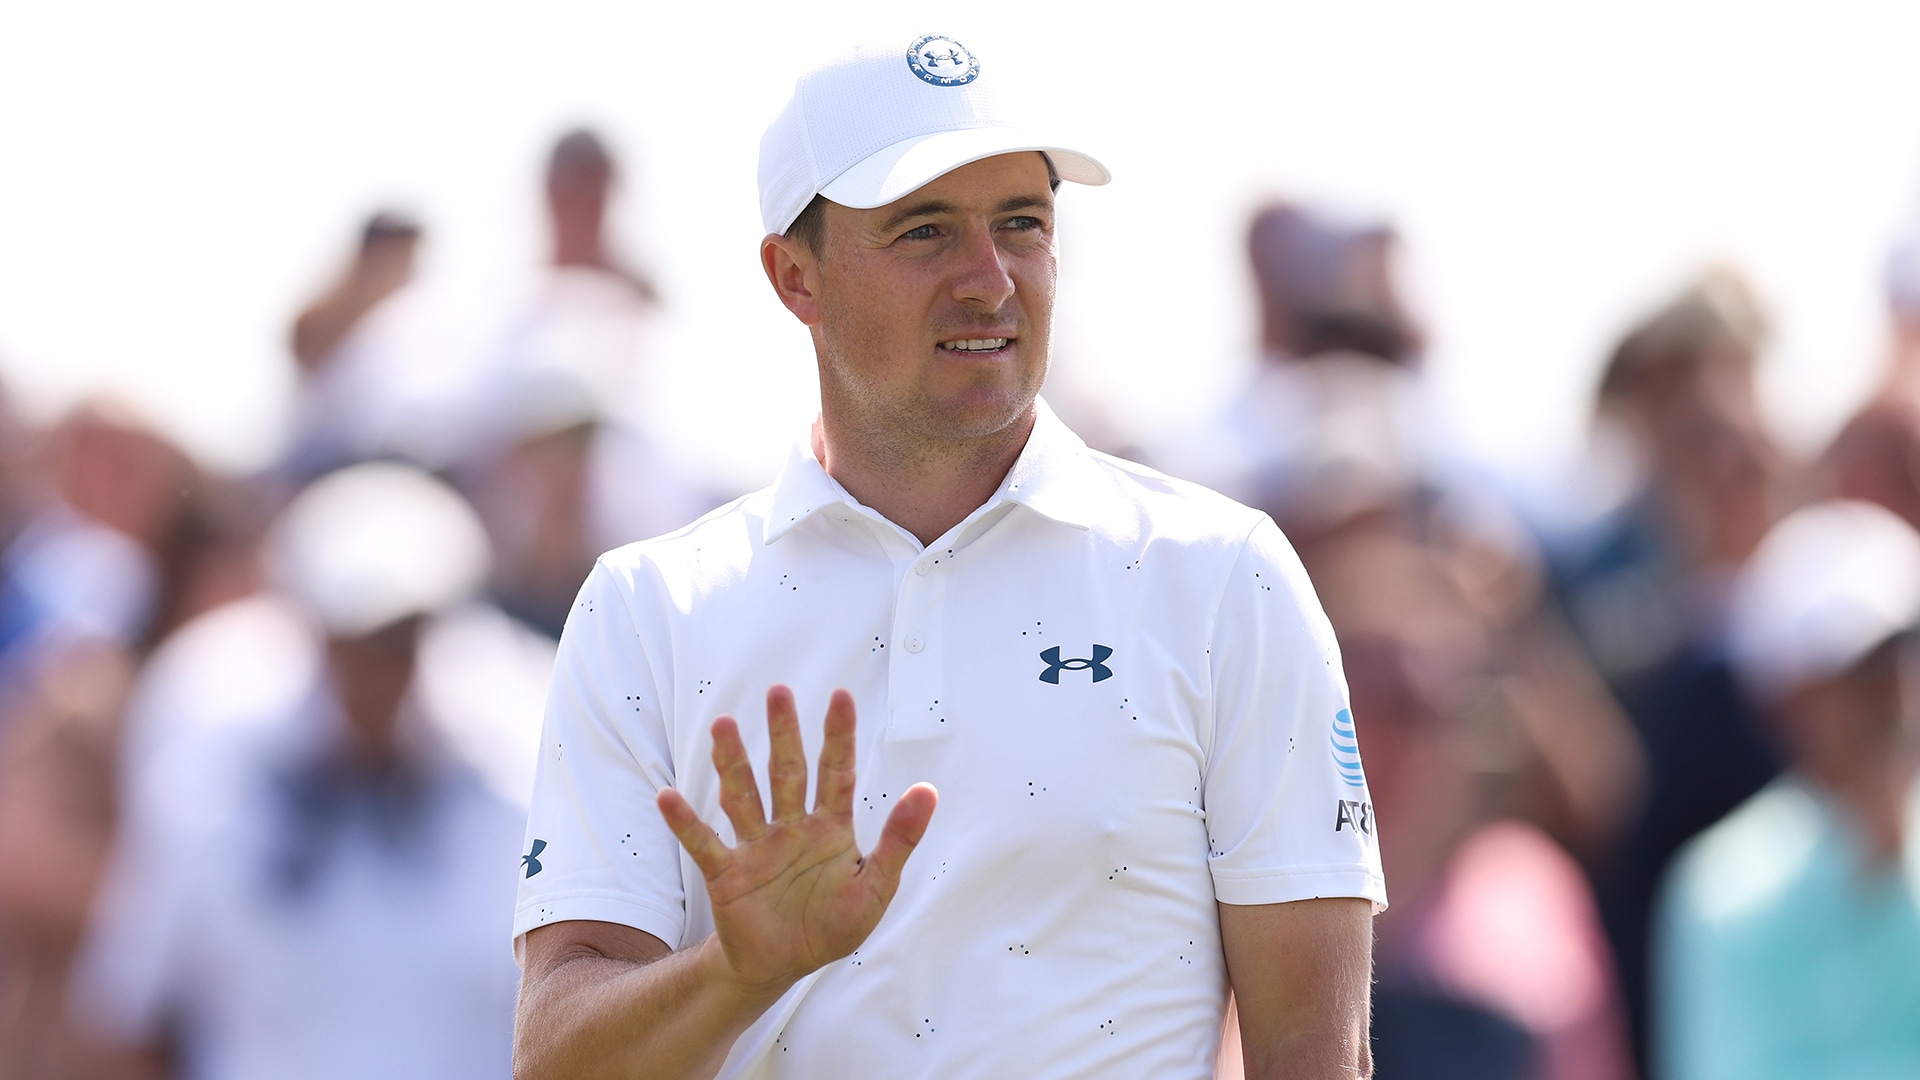 Knee-ded it: Jordan Spieth saved by fan, then chips in to safely make Players cut